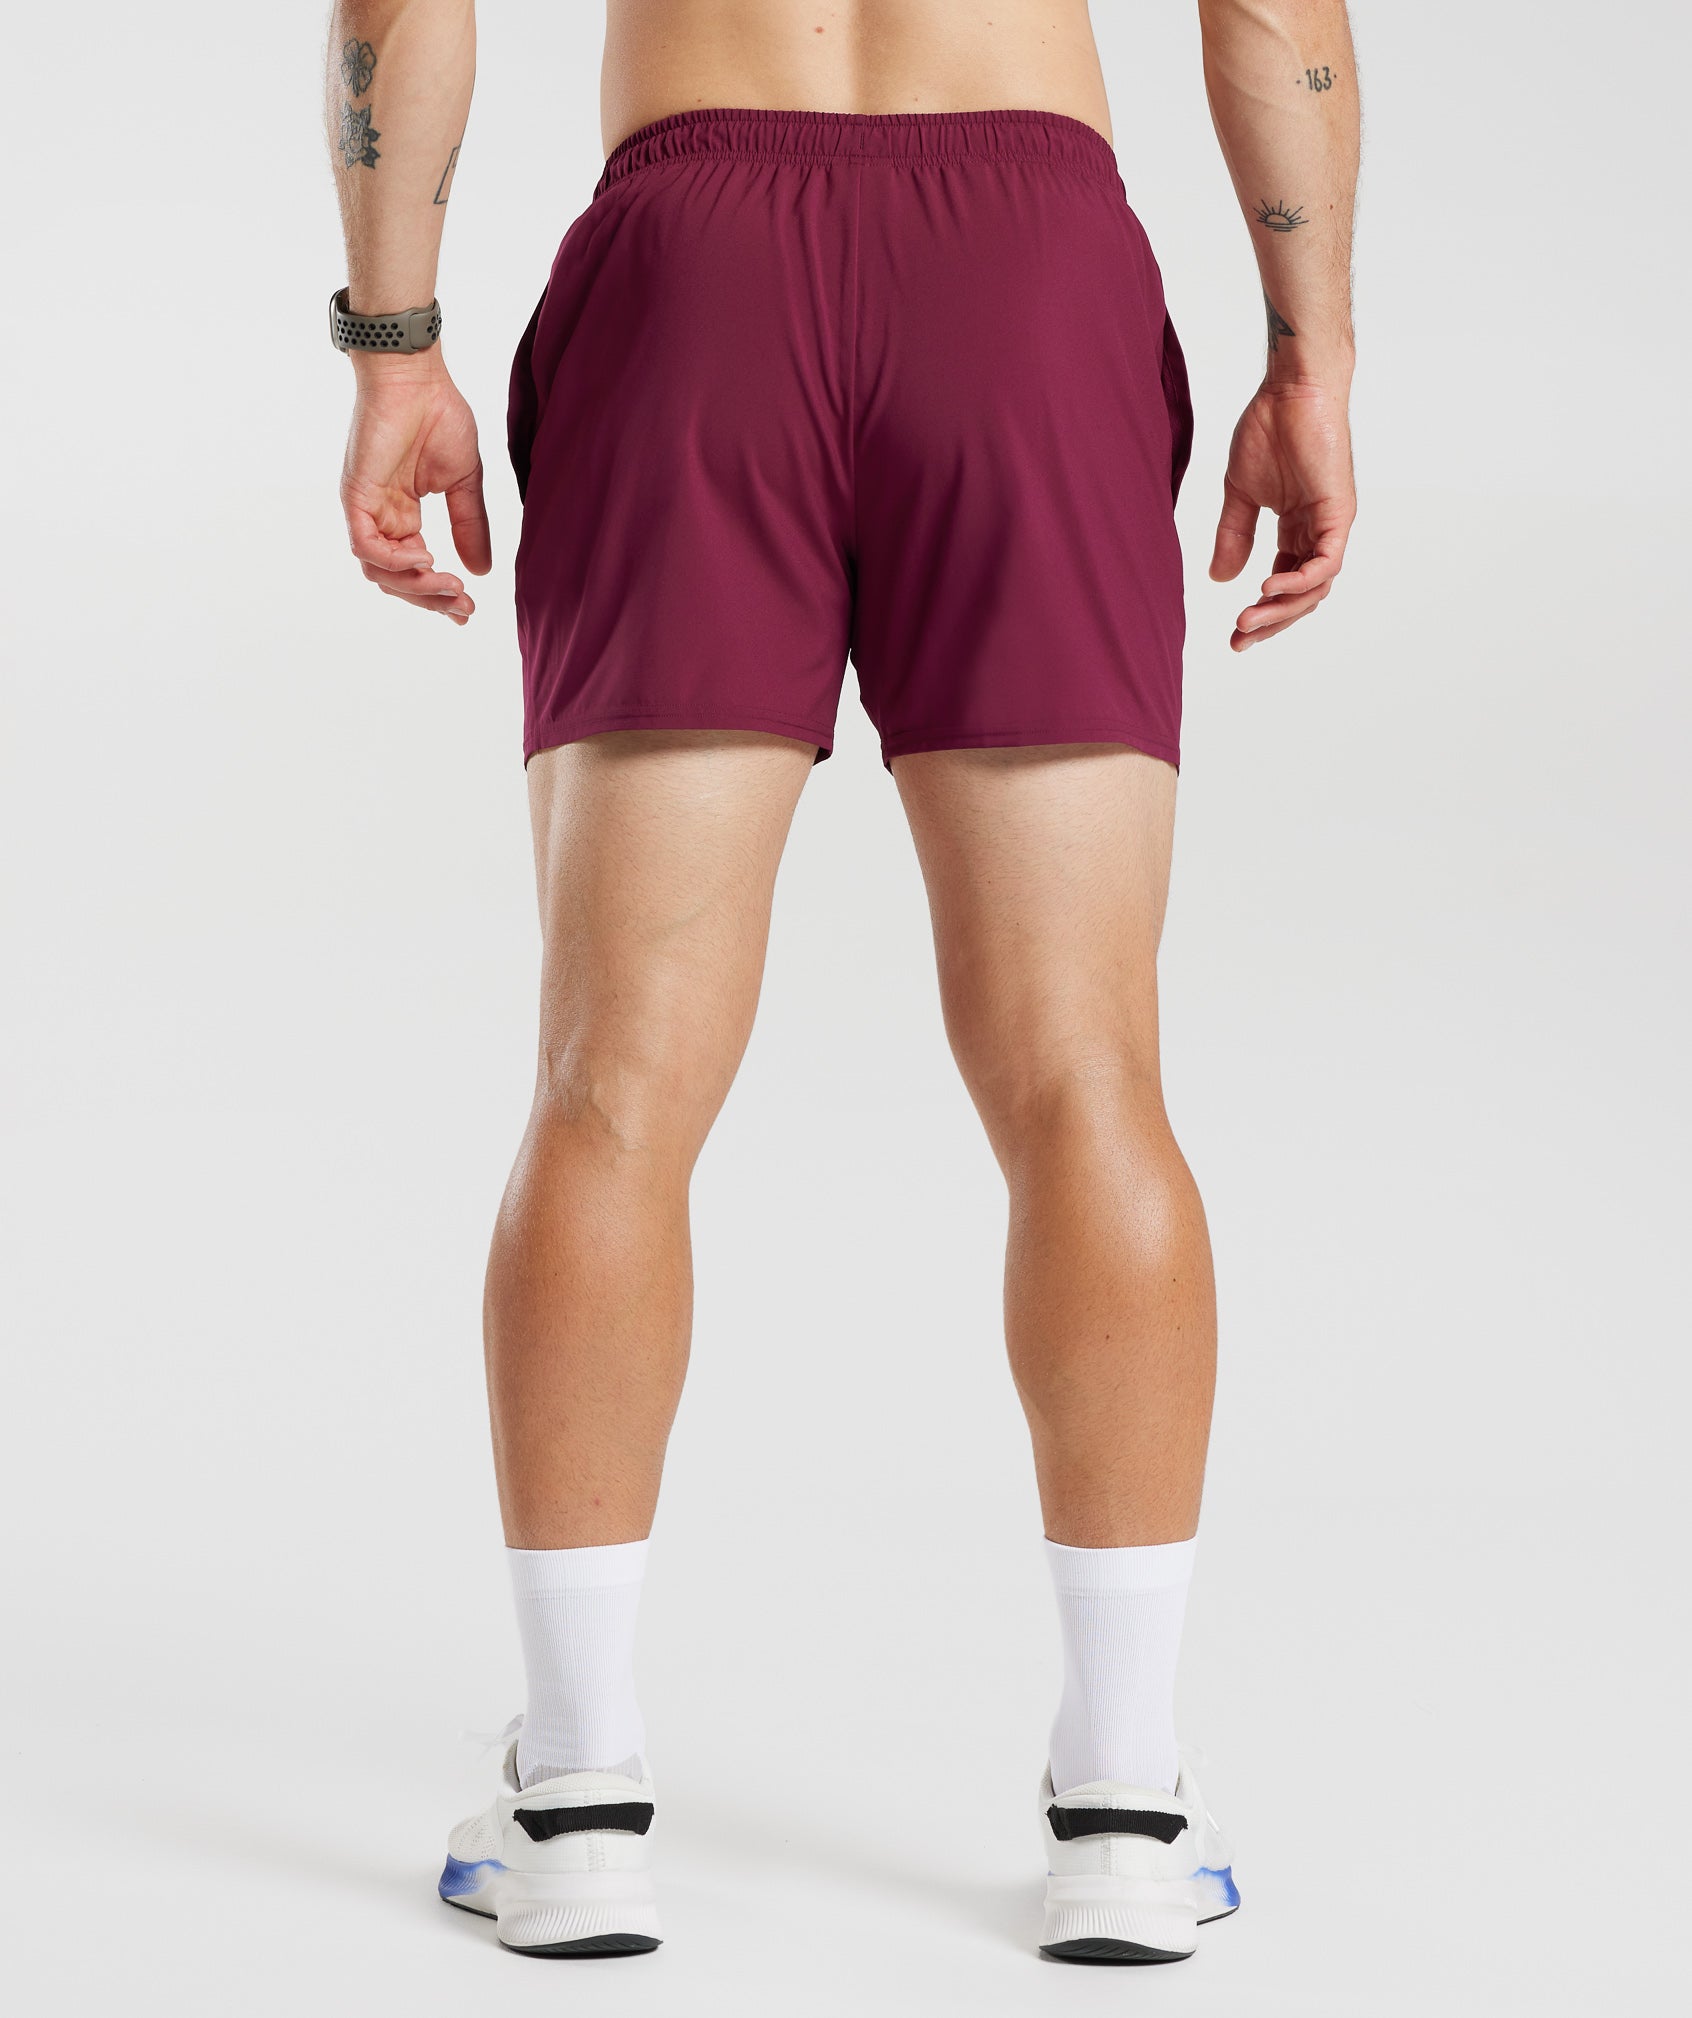 Arrival 5" Shorts in Plum Pink - view 2